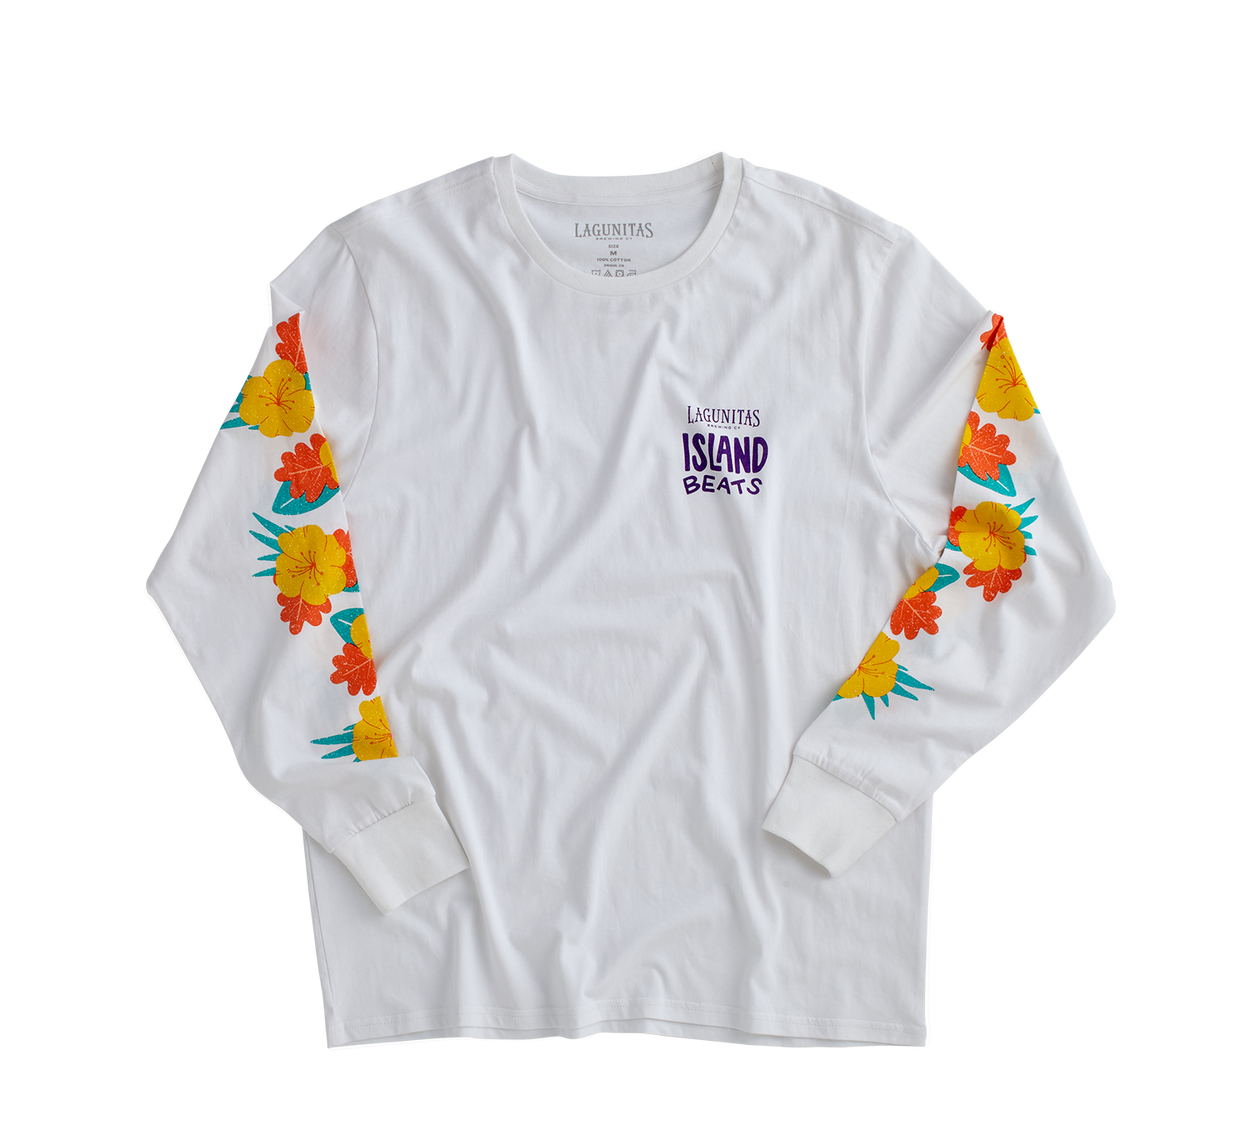 “A vibrant and tropical-inspired shirt featuring a colorful design, comfortable fit, and Lagunitas branding. Made from premium quality cotton fabric, perfect for beach vibes fashion and island-themed style”